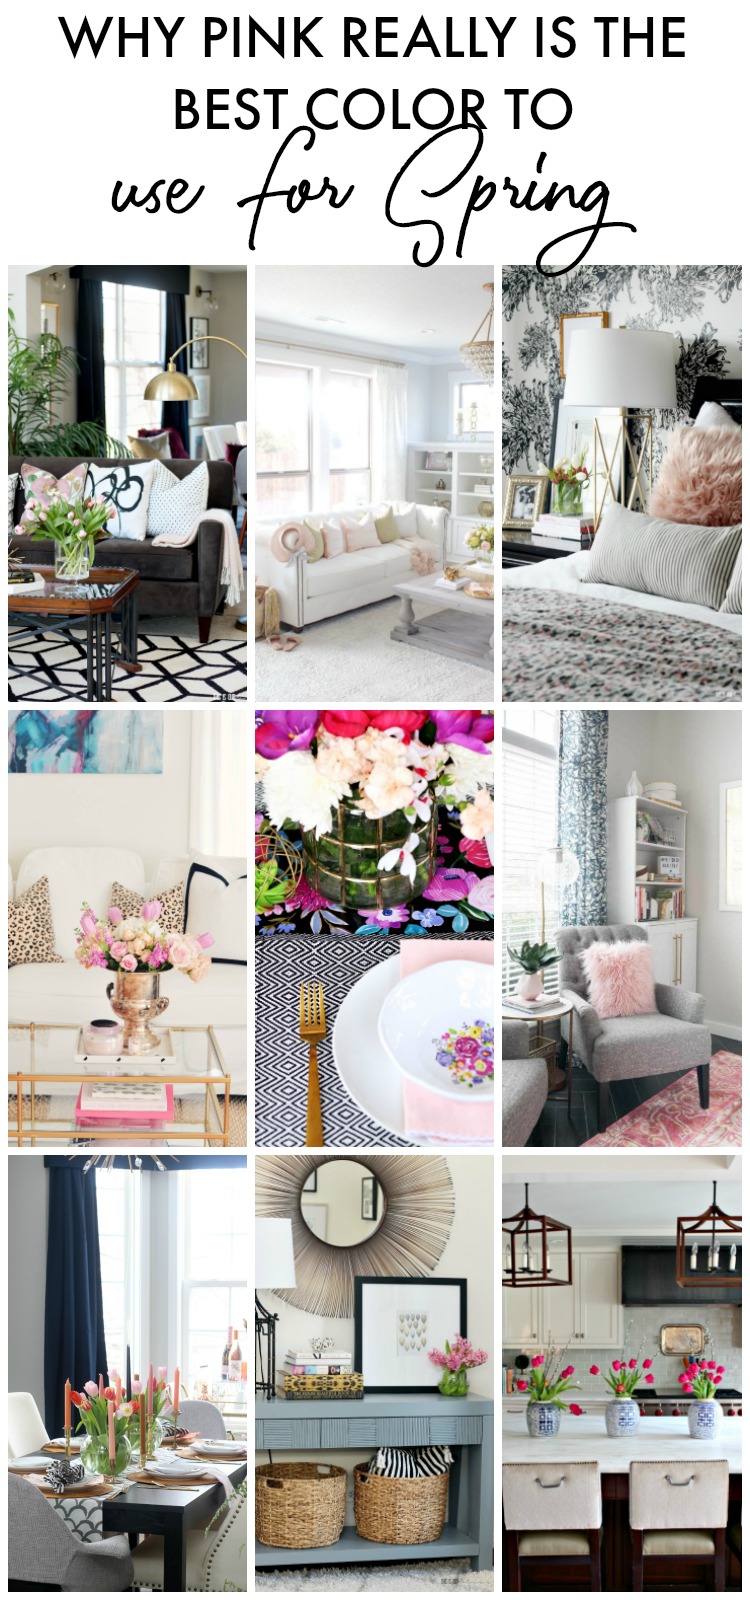 why Pink really is the best color to use for Spring - pink spring decor ideas - This is our Bliss